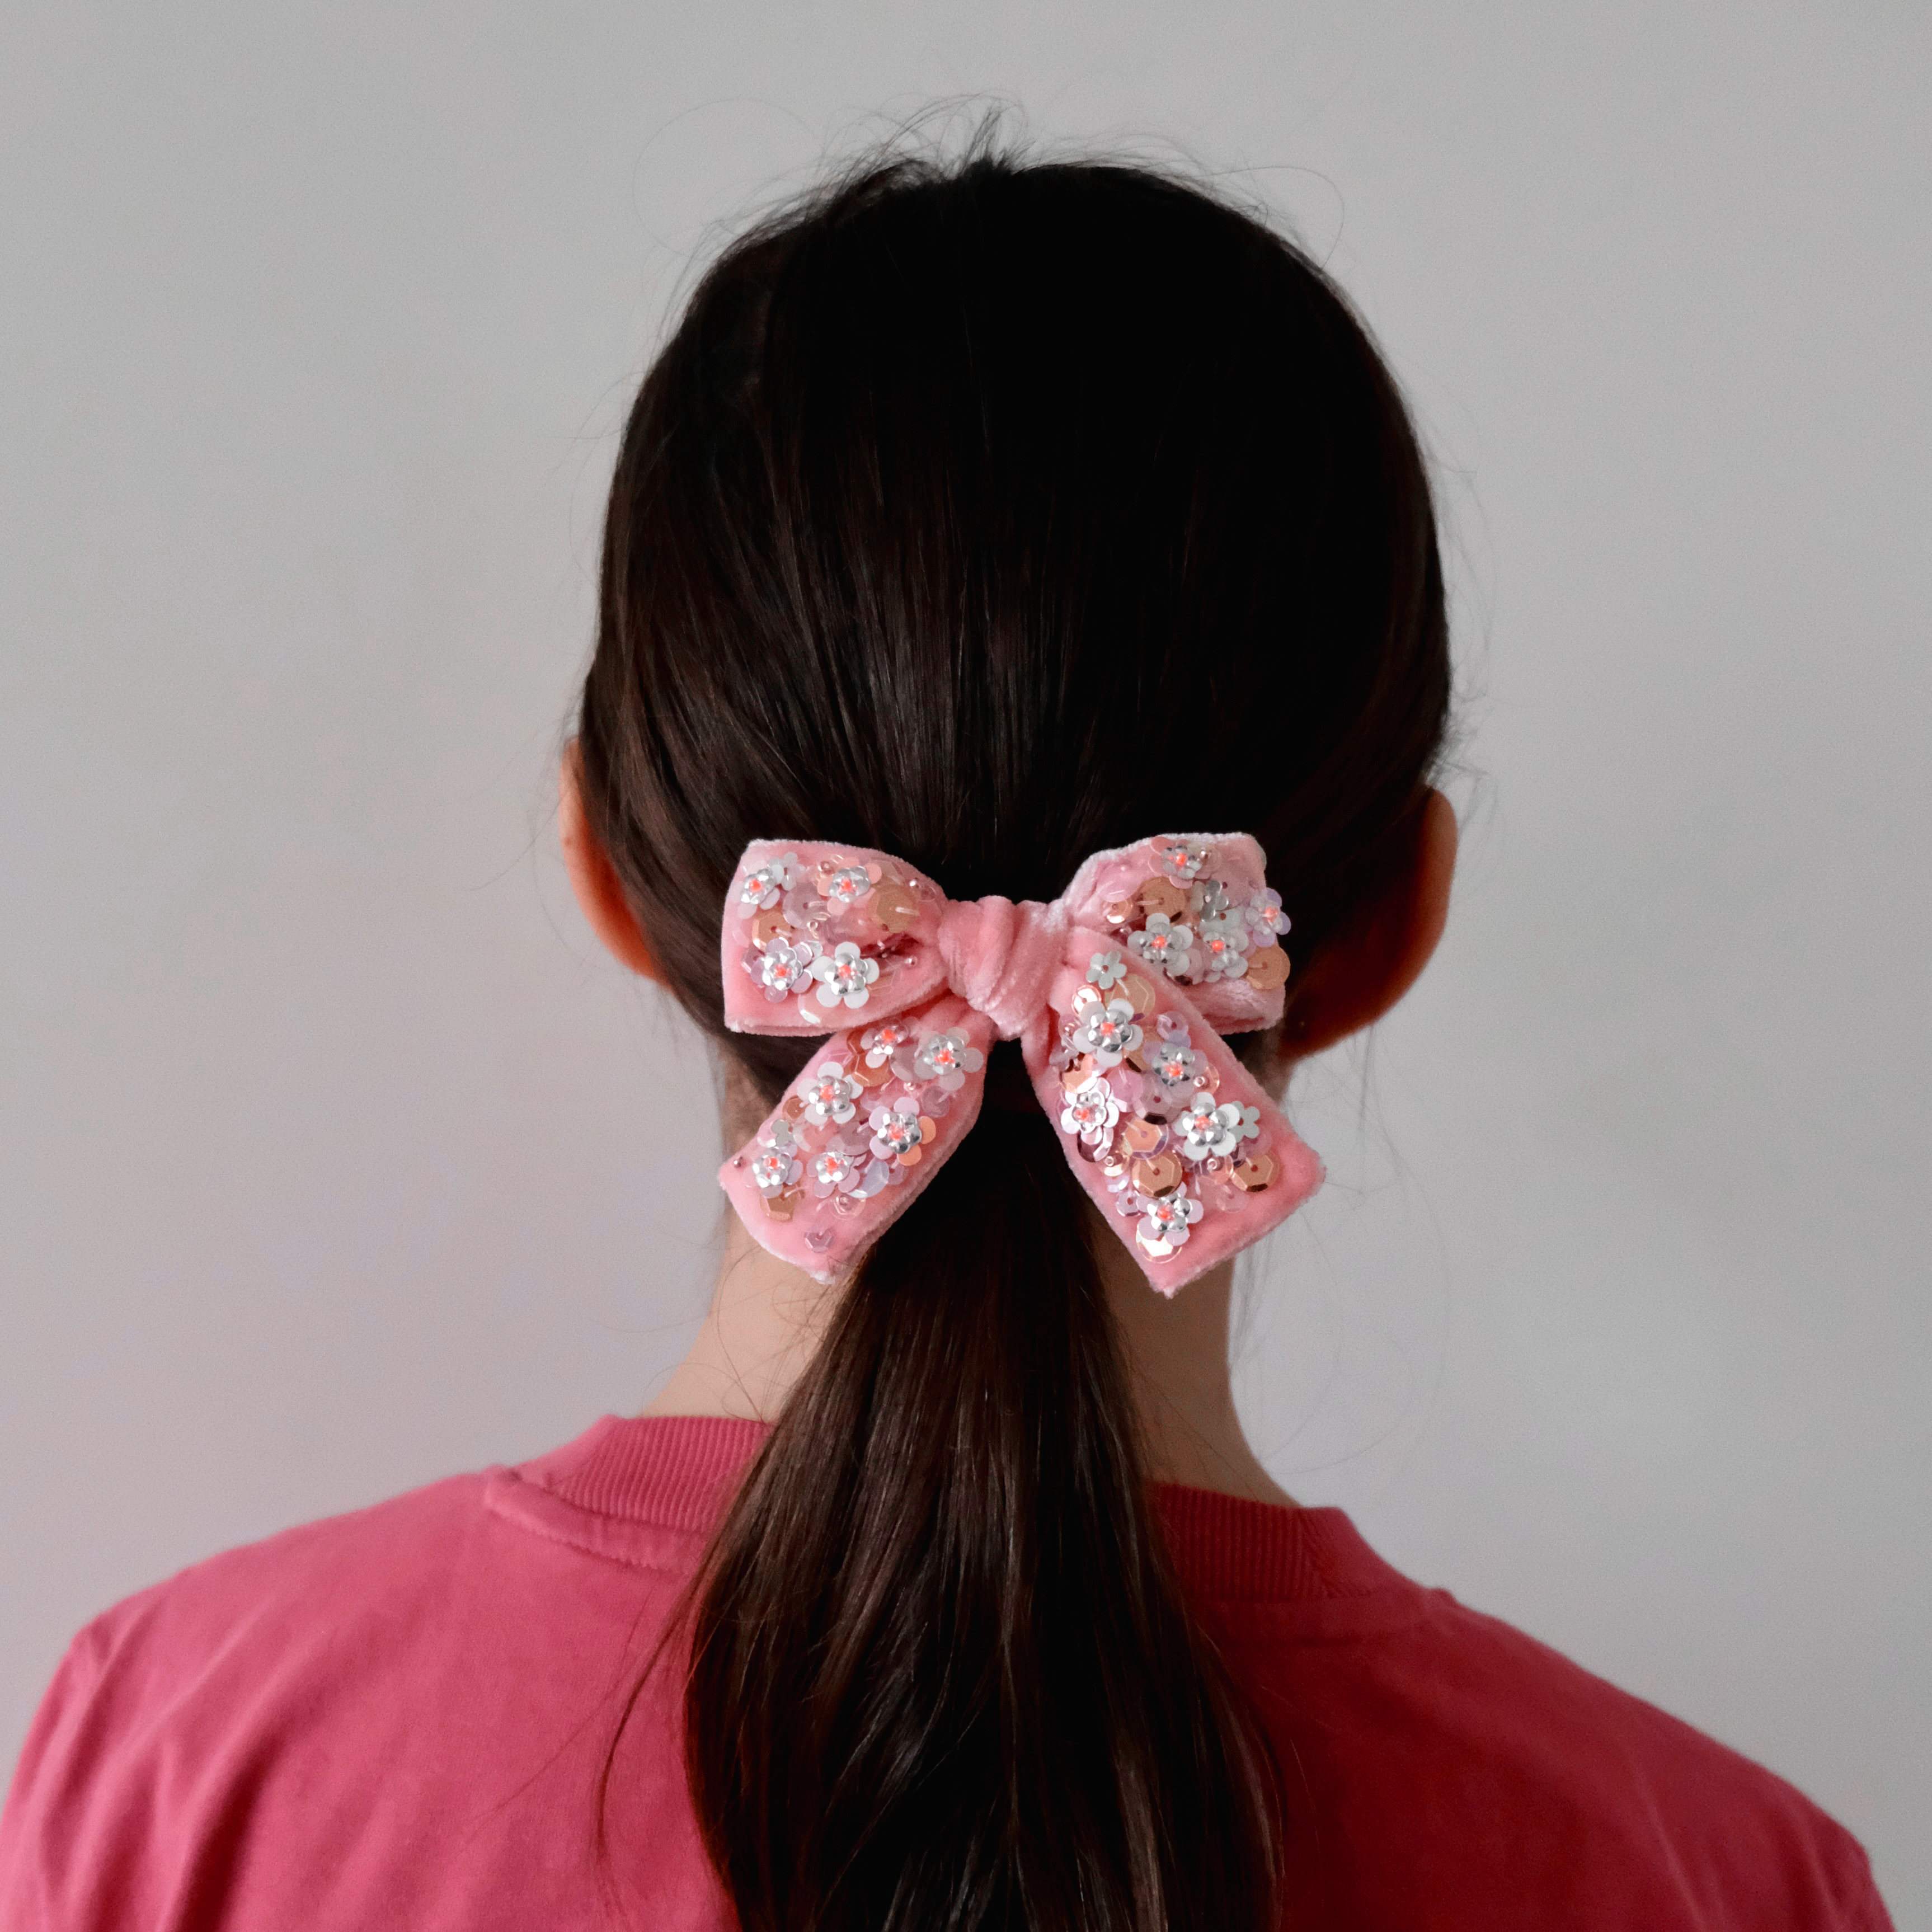 School girl with baby pink velvet hair bow embellished with sequins.